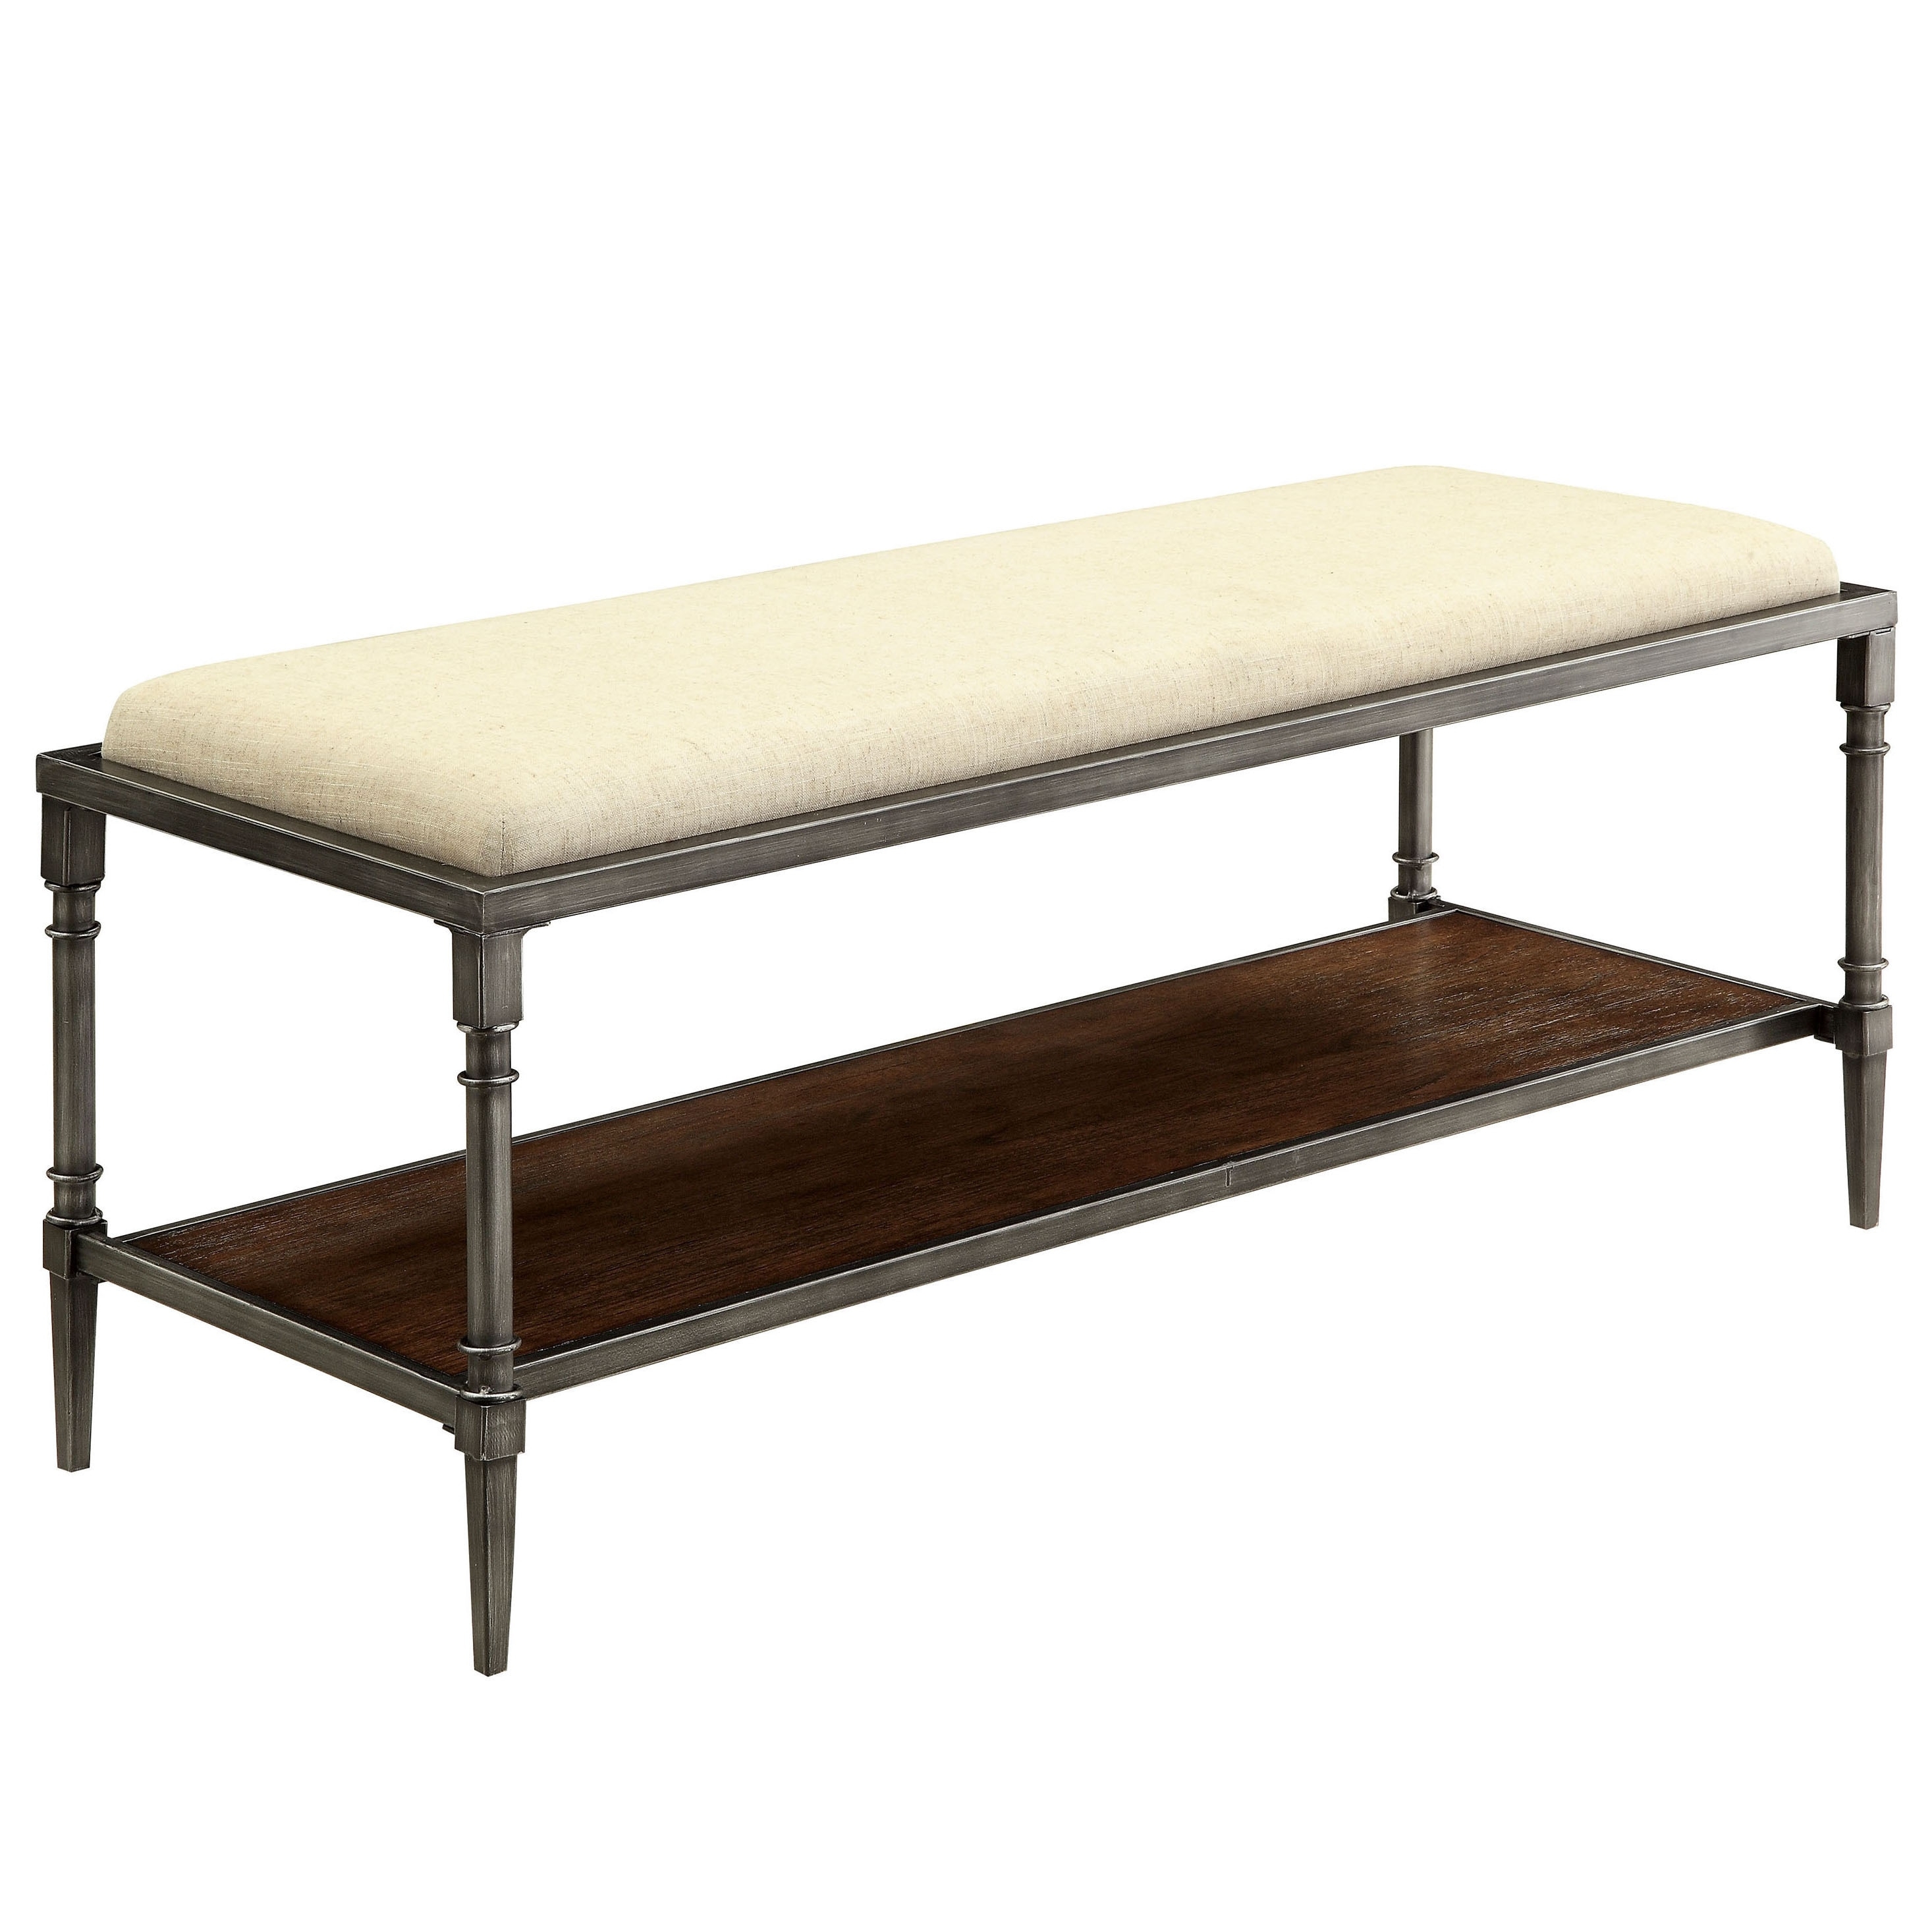 Furniture of America Loren Natural Industrial Ivory Flax Bench - Image 0